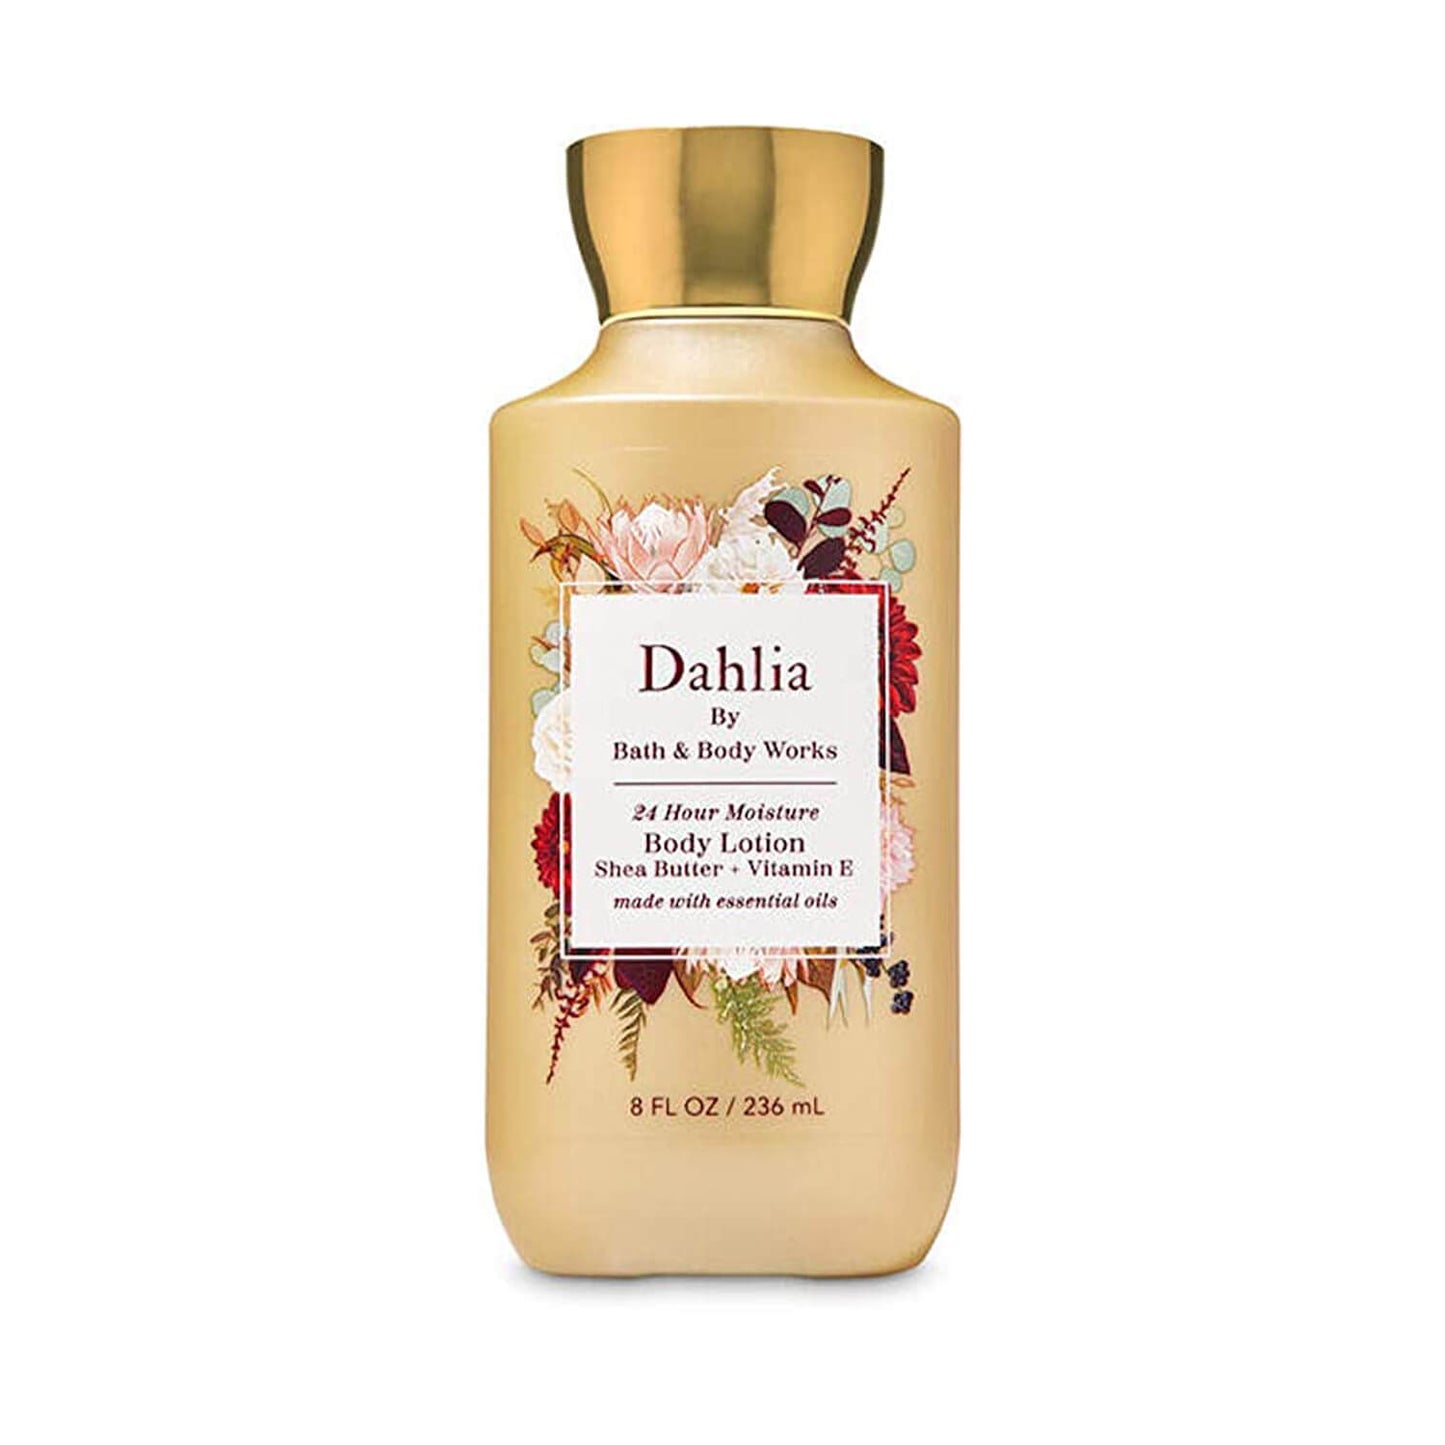 Buy  Bath & Body Works body lotion in Dahlia fragrance available at heygirl.pk for cash on delivery in Karachi, Lahore, Islamabad, Rawalpindi across Pakistan. 